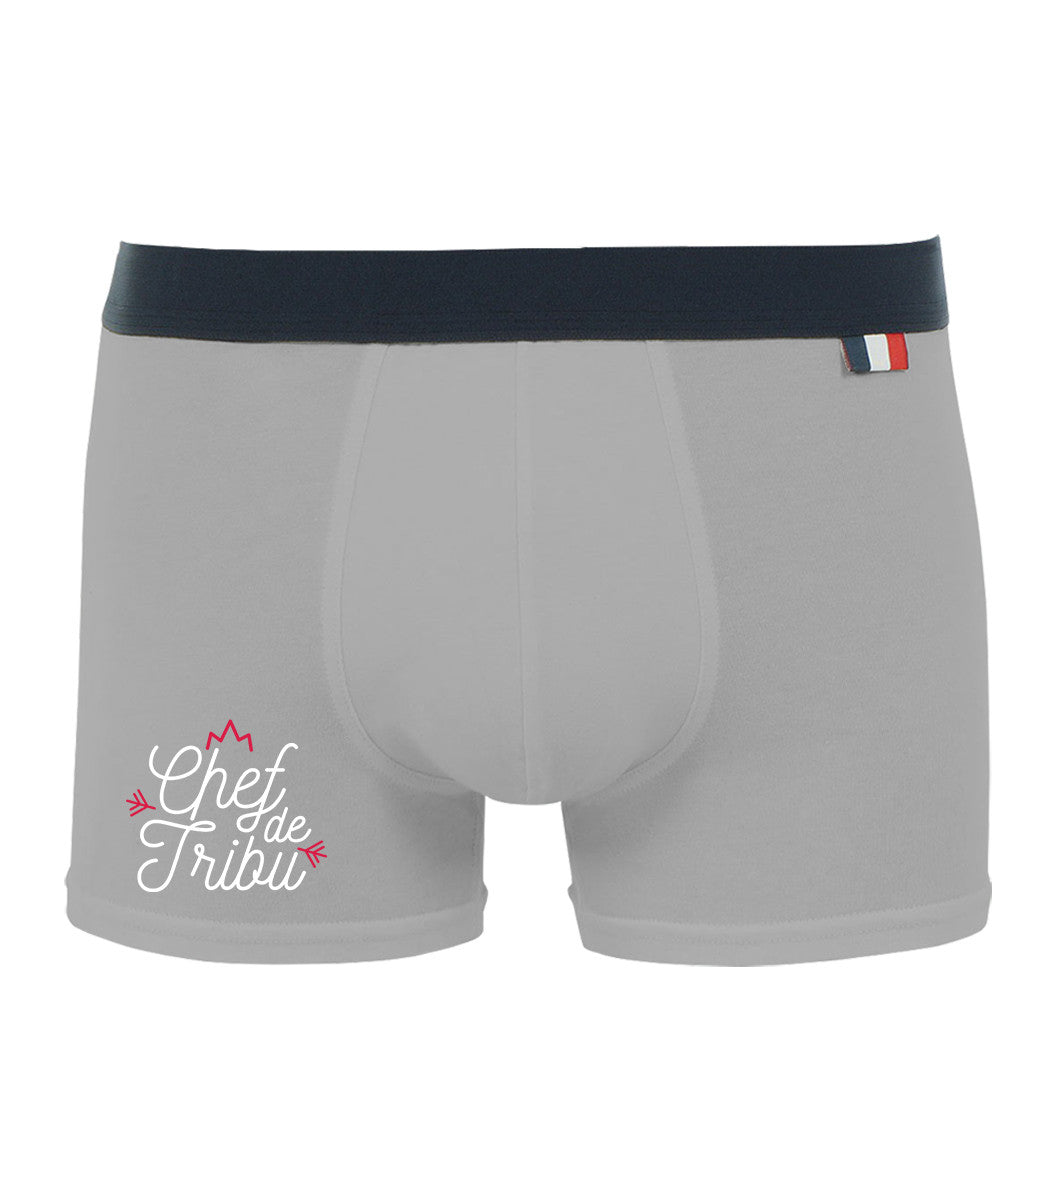 Boxer Homme x3 - Pack Papa